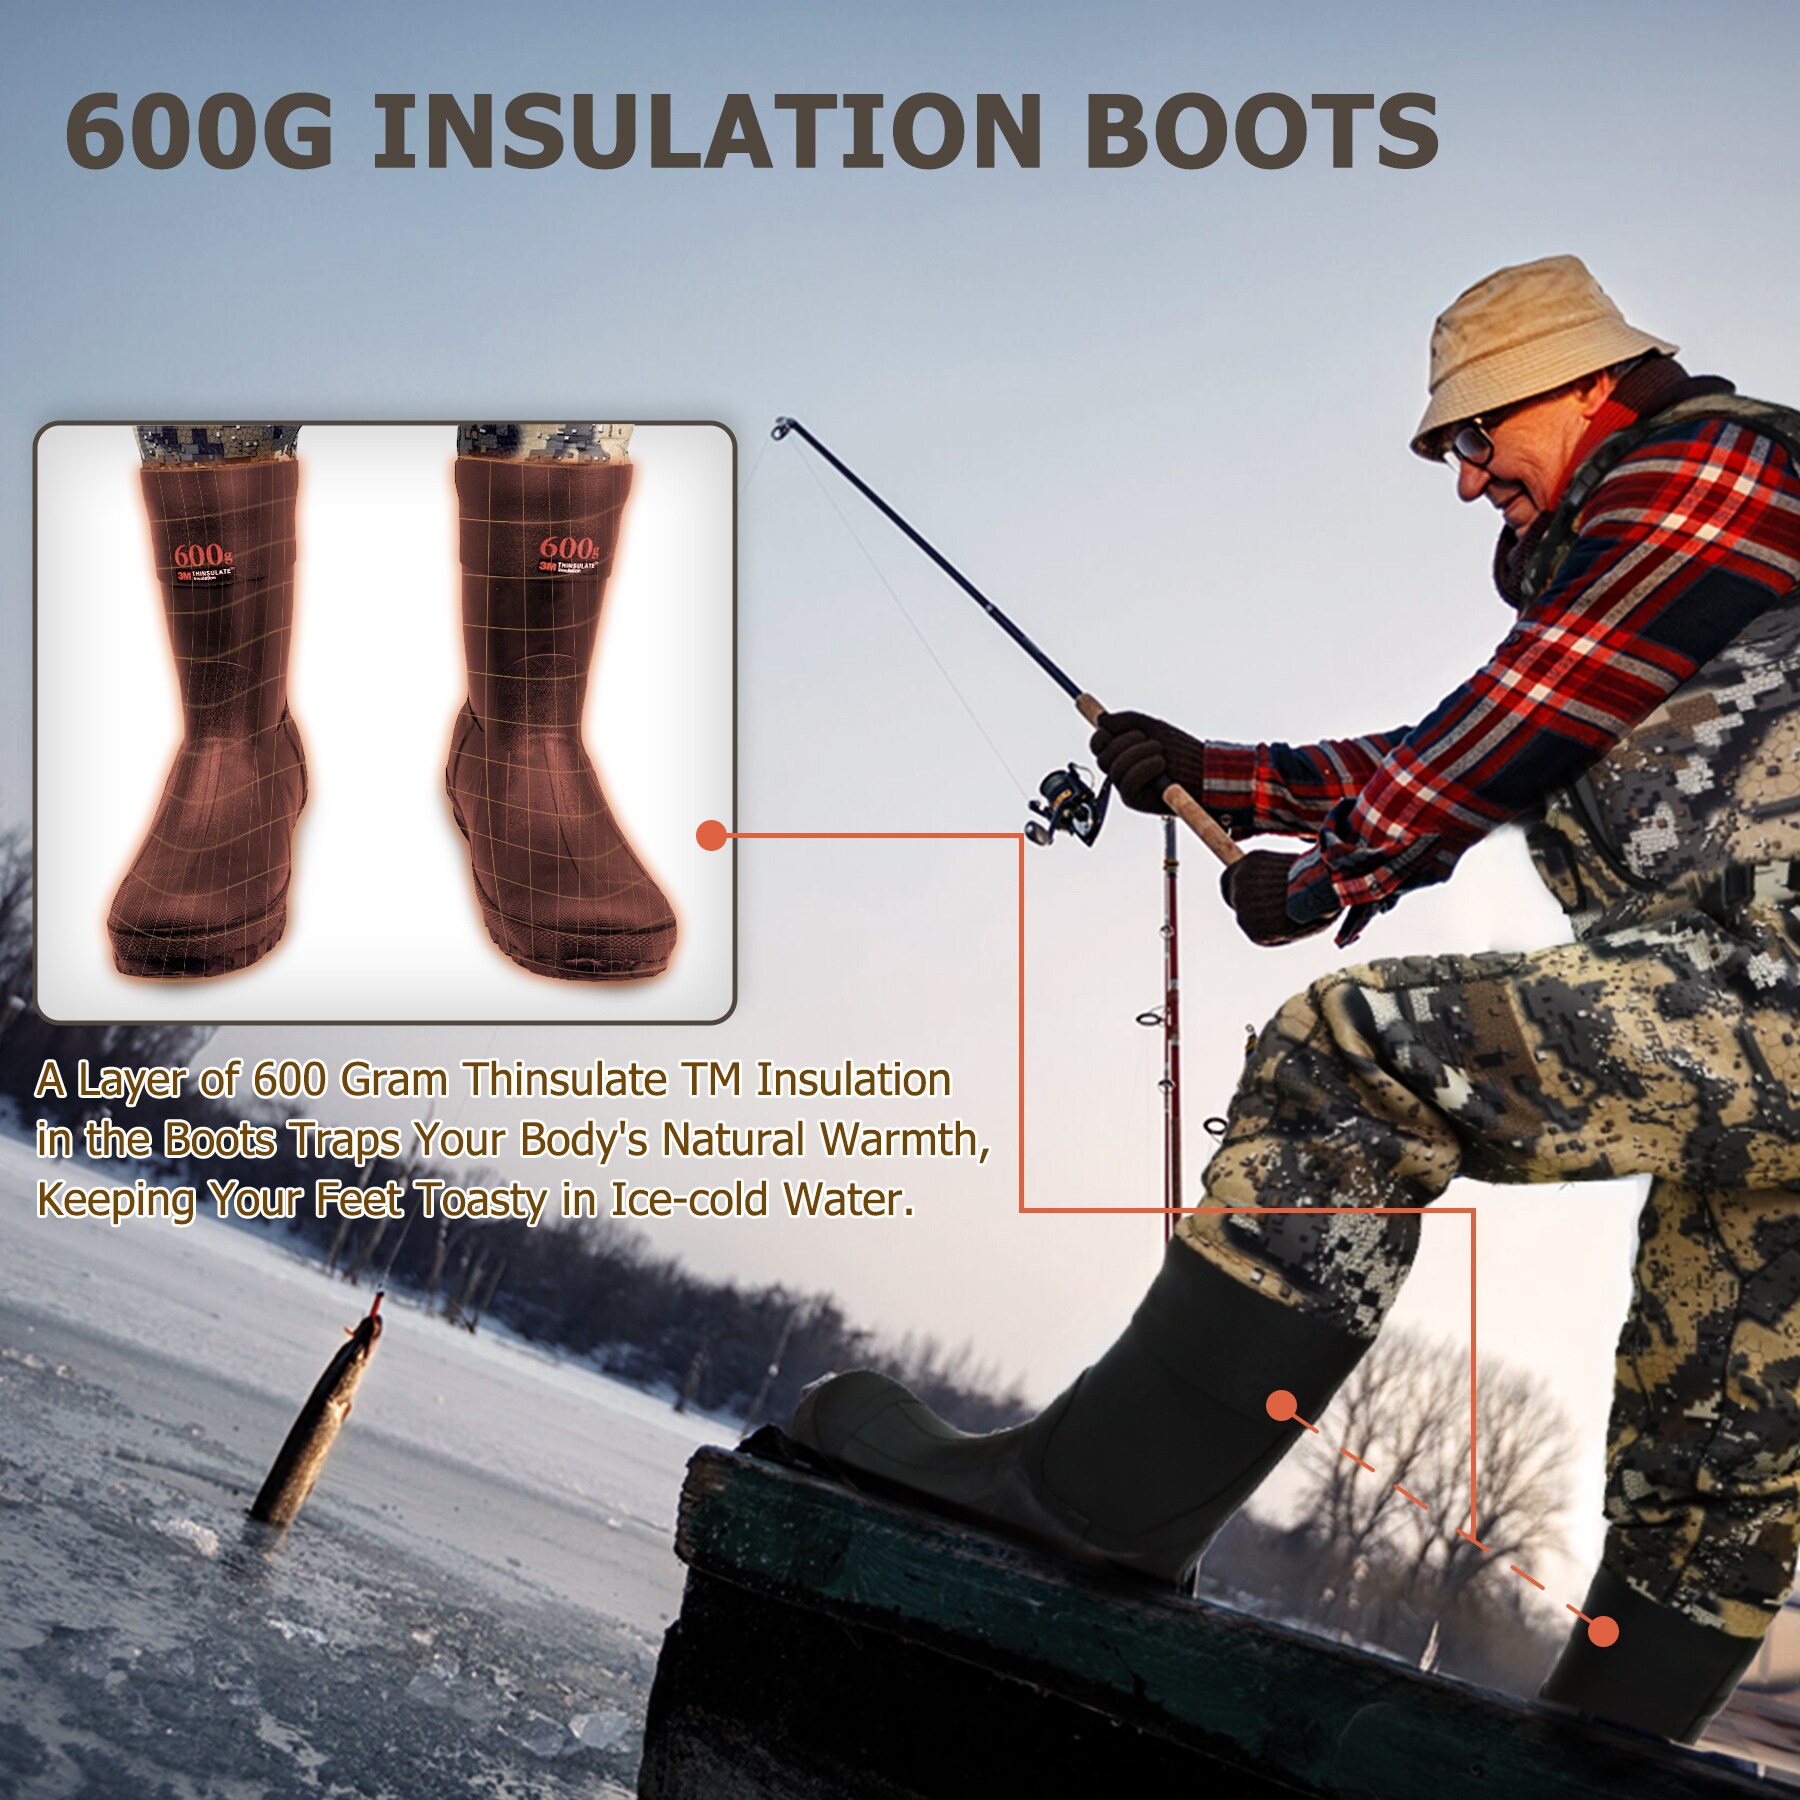 CAMOZONE Neoprene Chest Waders with Boots-size14 Unisex Fishing